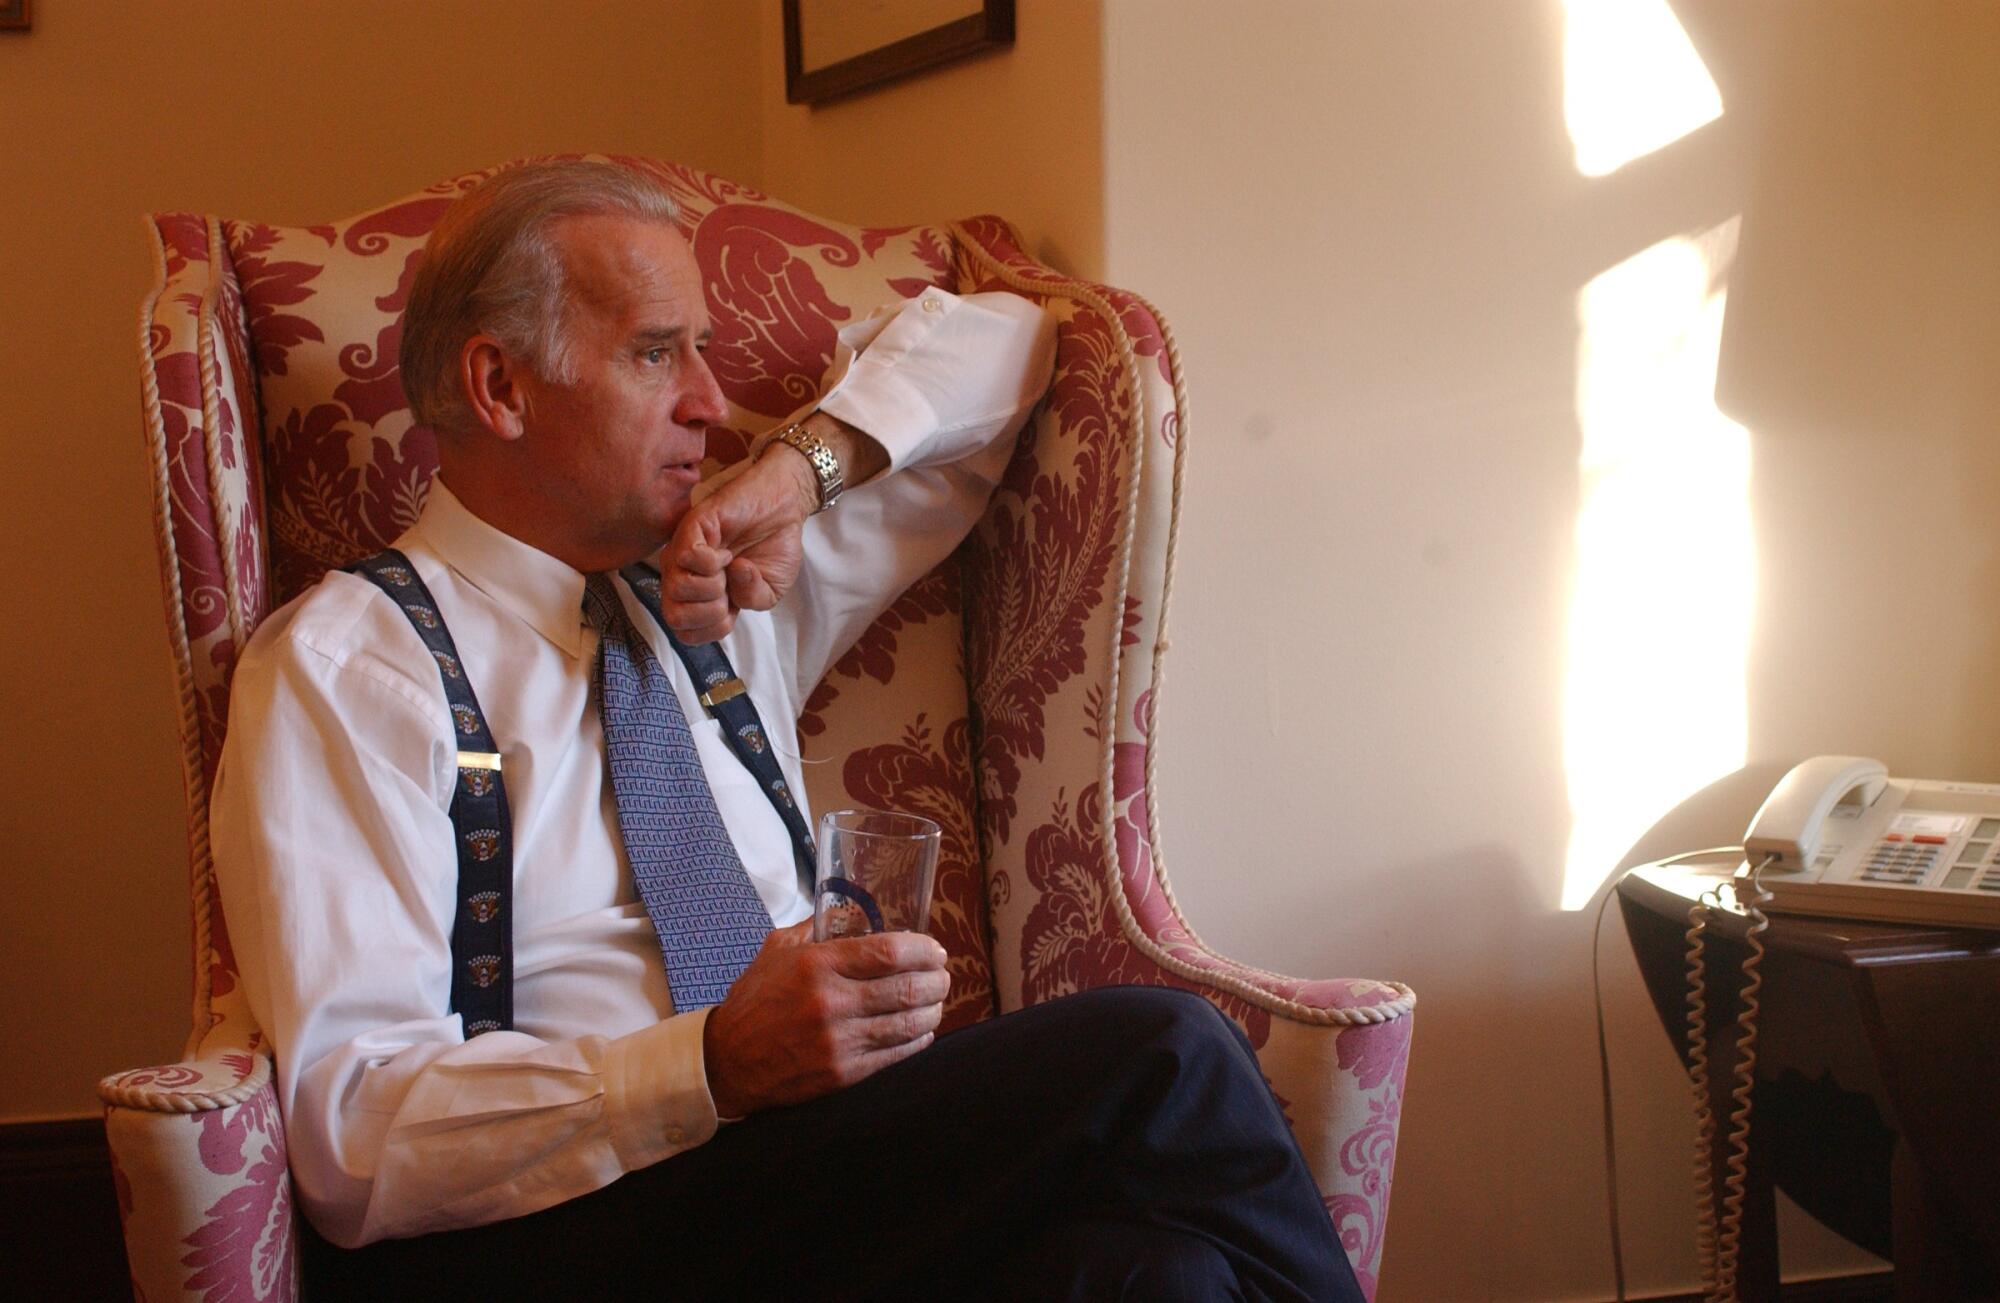 In February 2003, Sen. Joe Biden is interviewed in his office about the possibility of war with Iraq.